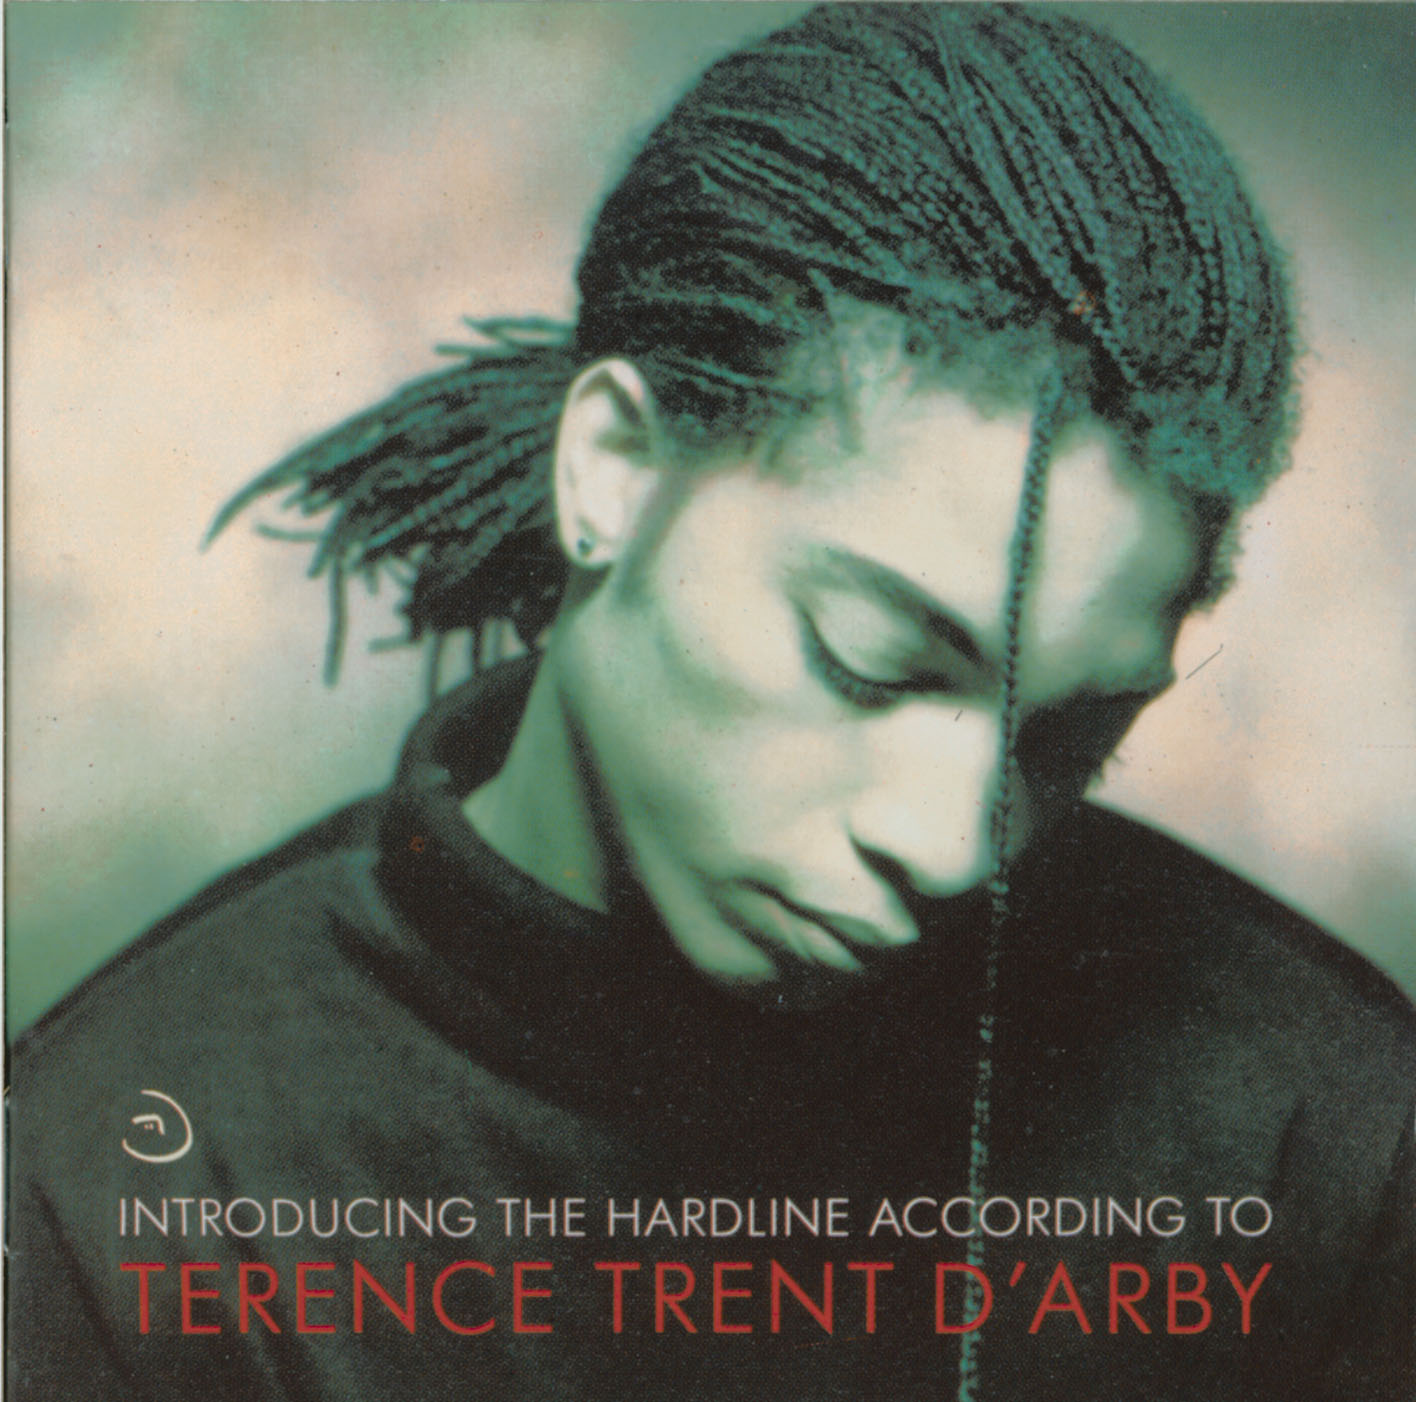 Introducing The Hardline According To Terence Trent D’Arby